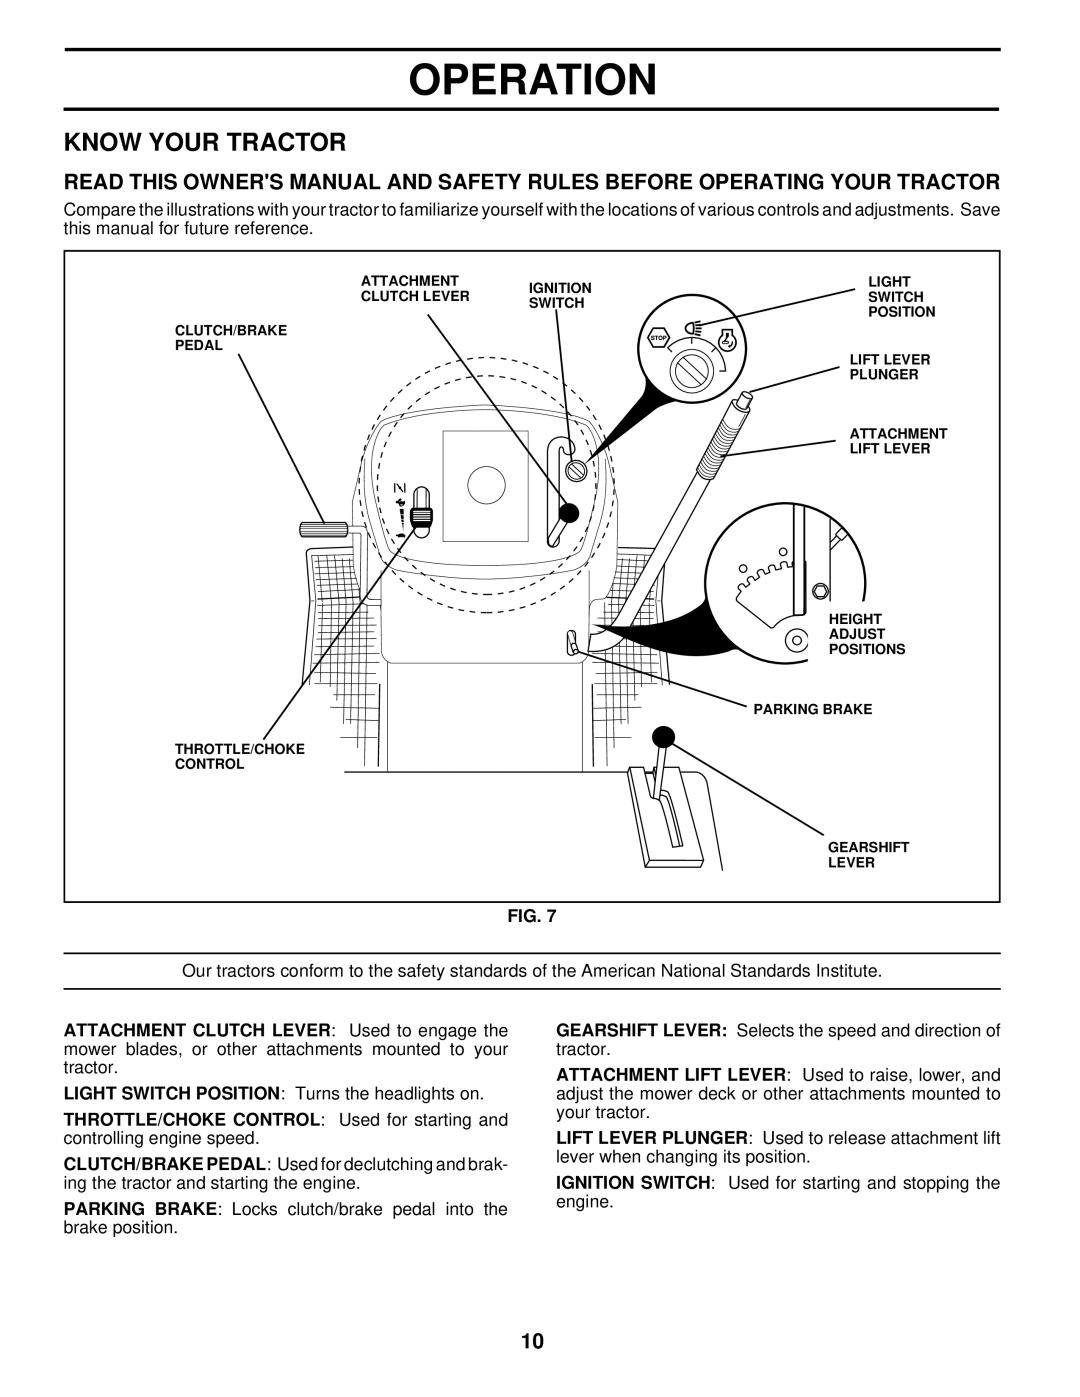 Husqvarna LT120 owner manual Know Your Tractor, Operation 